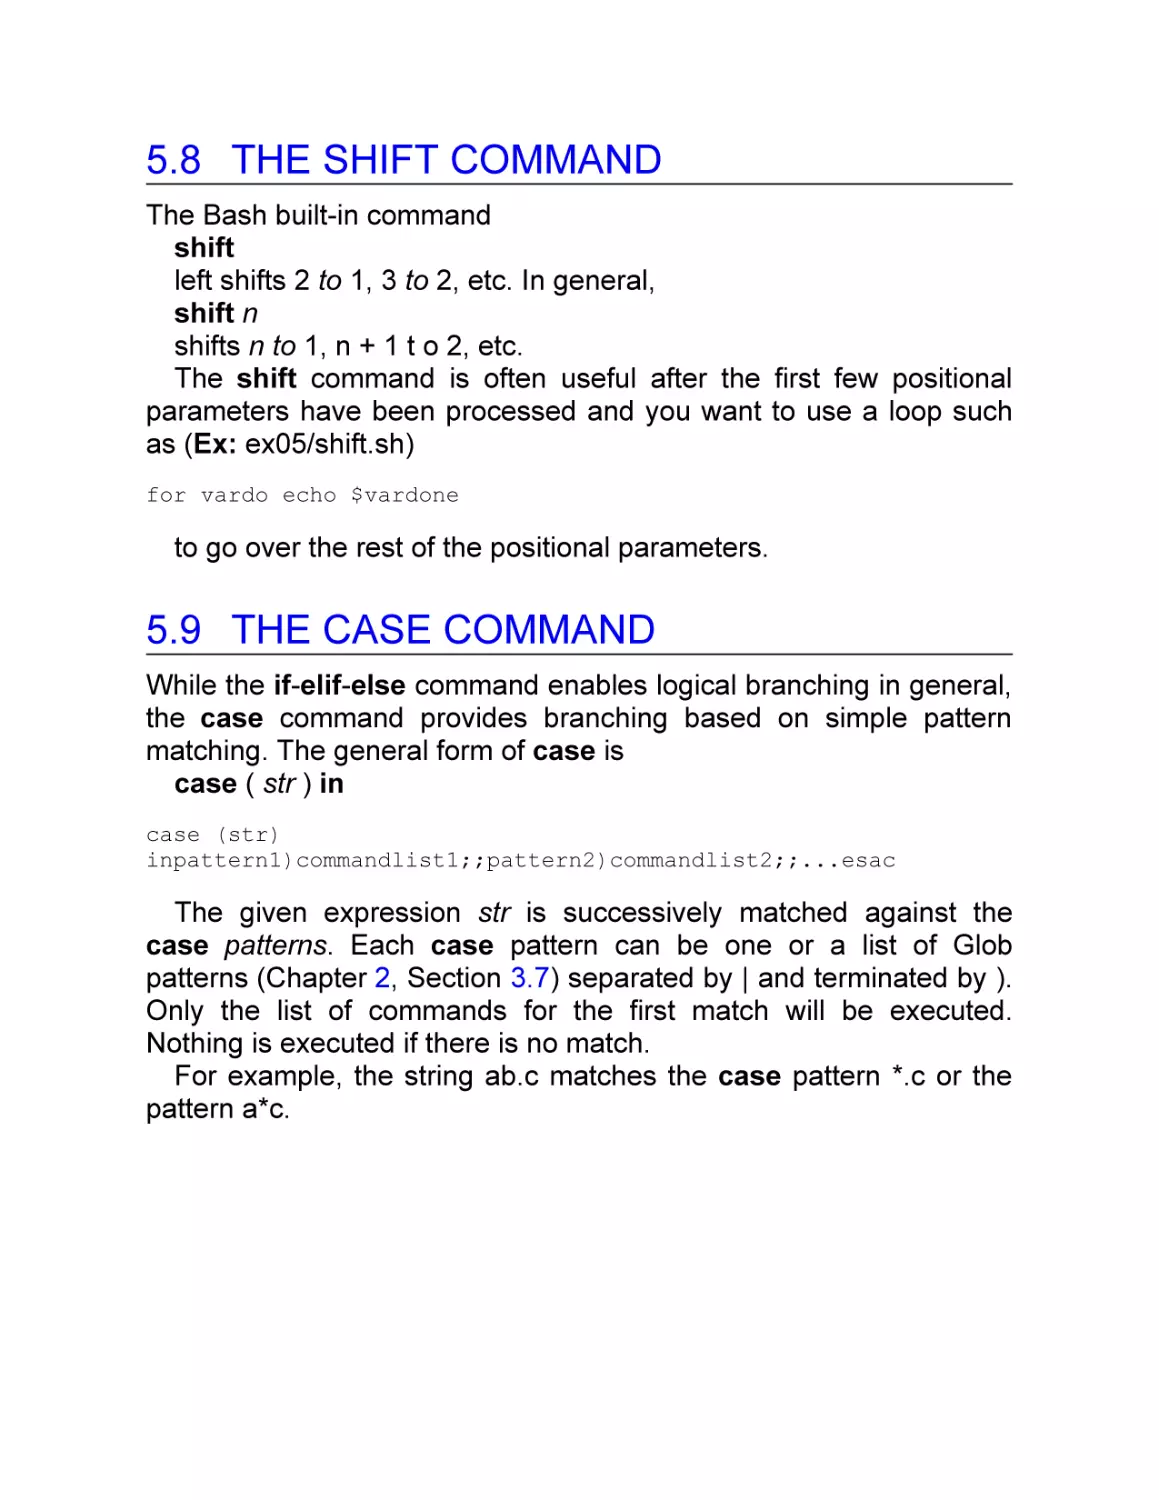 5.8 The shift Command
5.9 The case Command